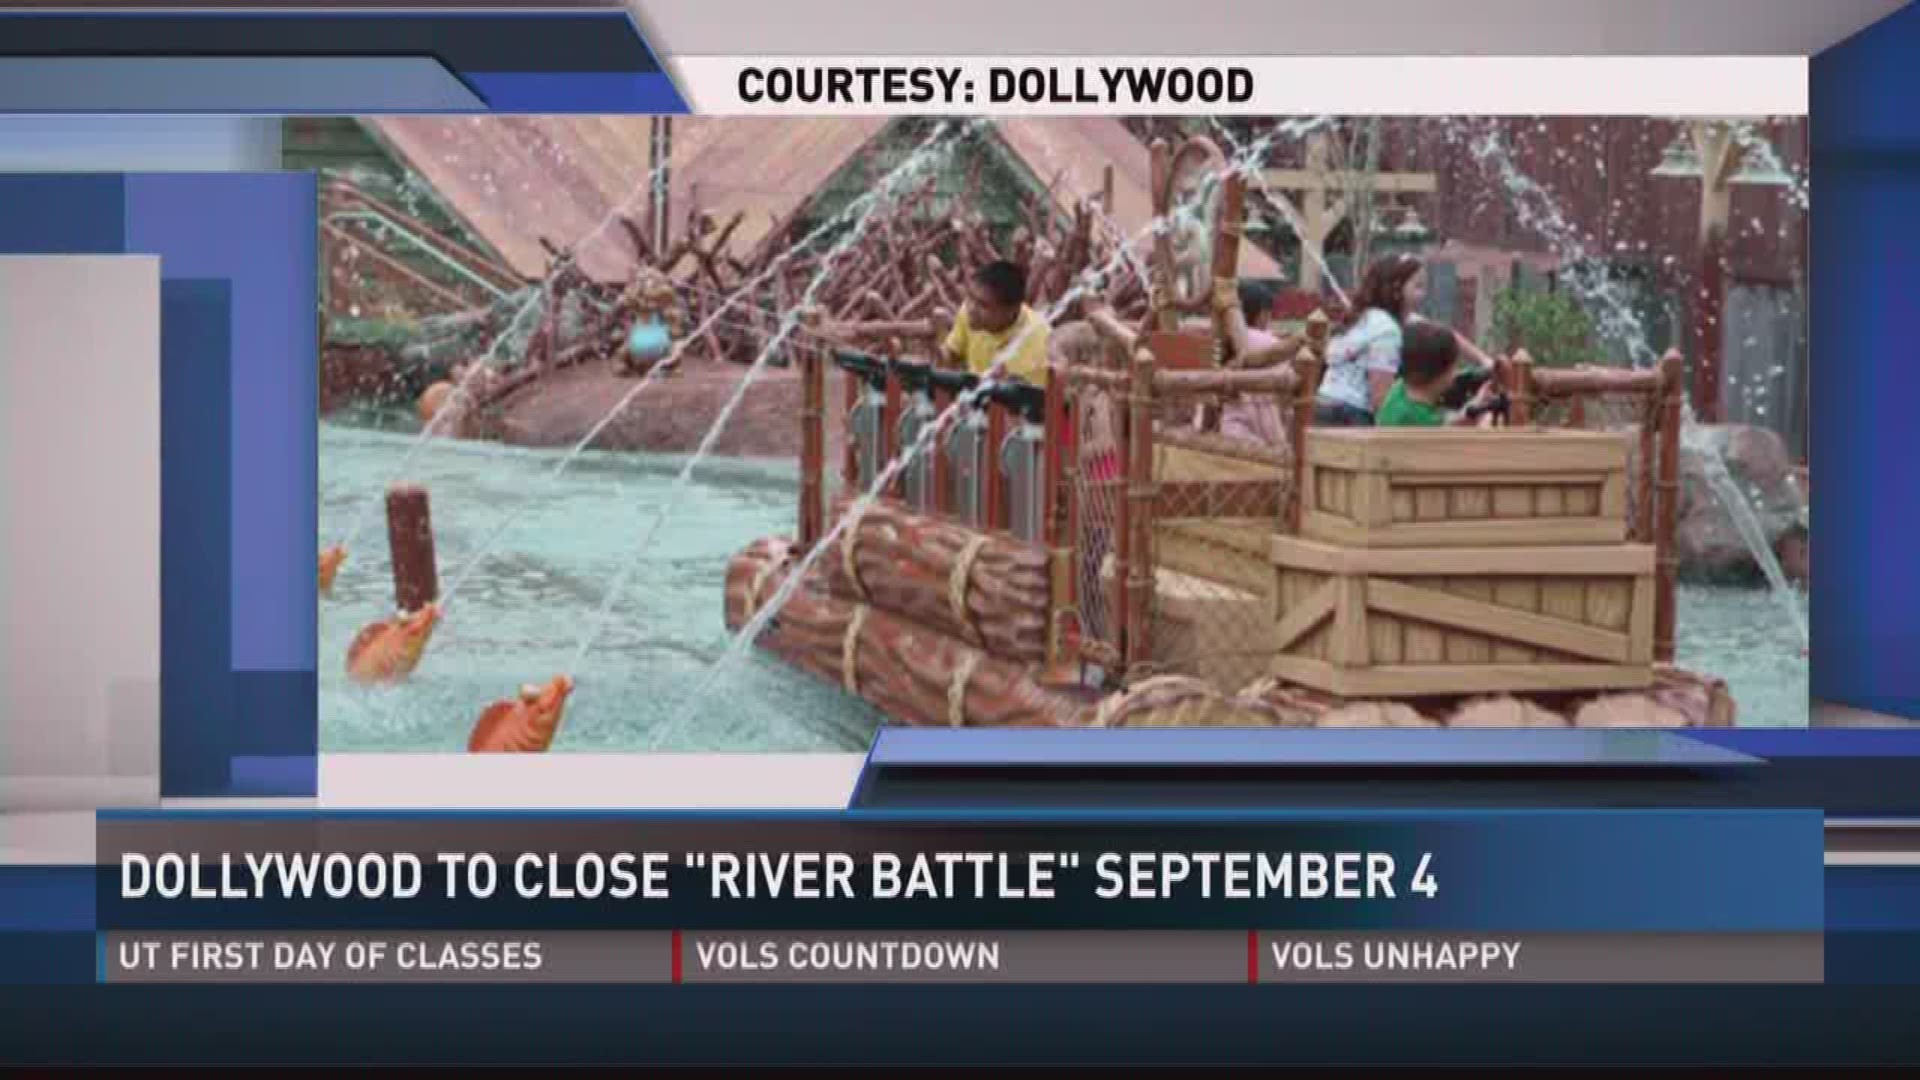 Dollywood said the popular River Battle ride will close Sept 4 to make room for future improvements, which will be announced later.